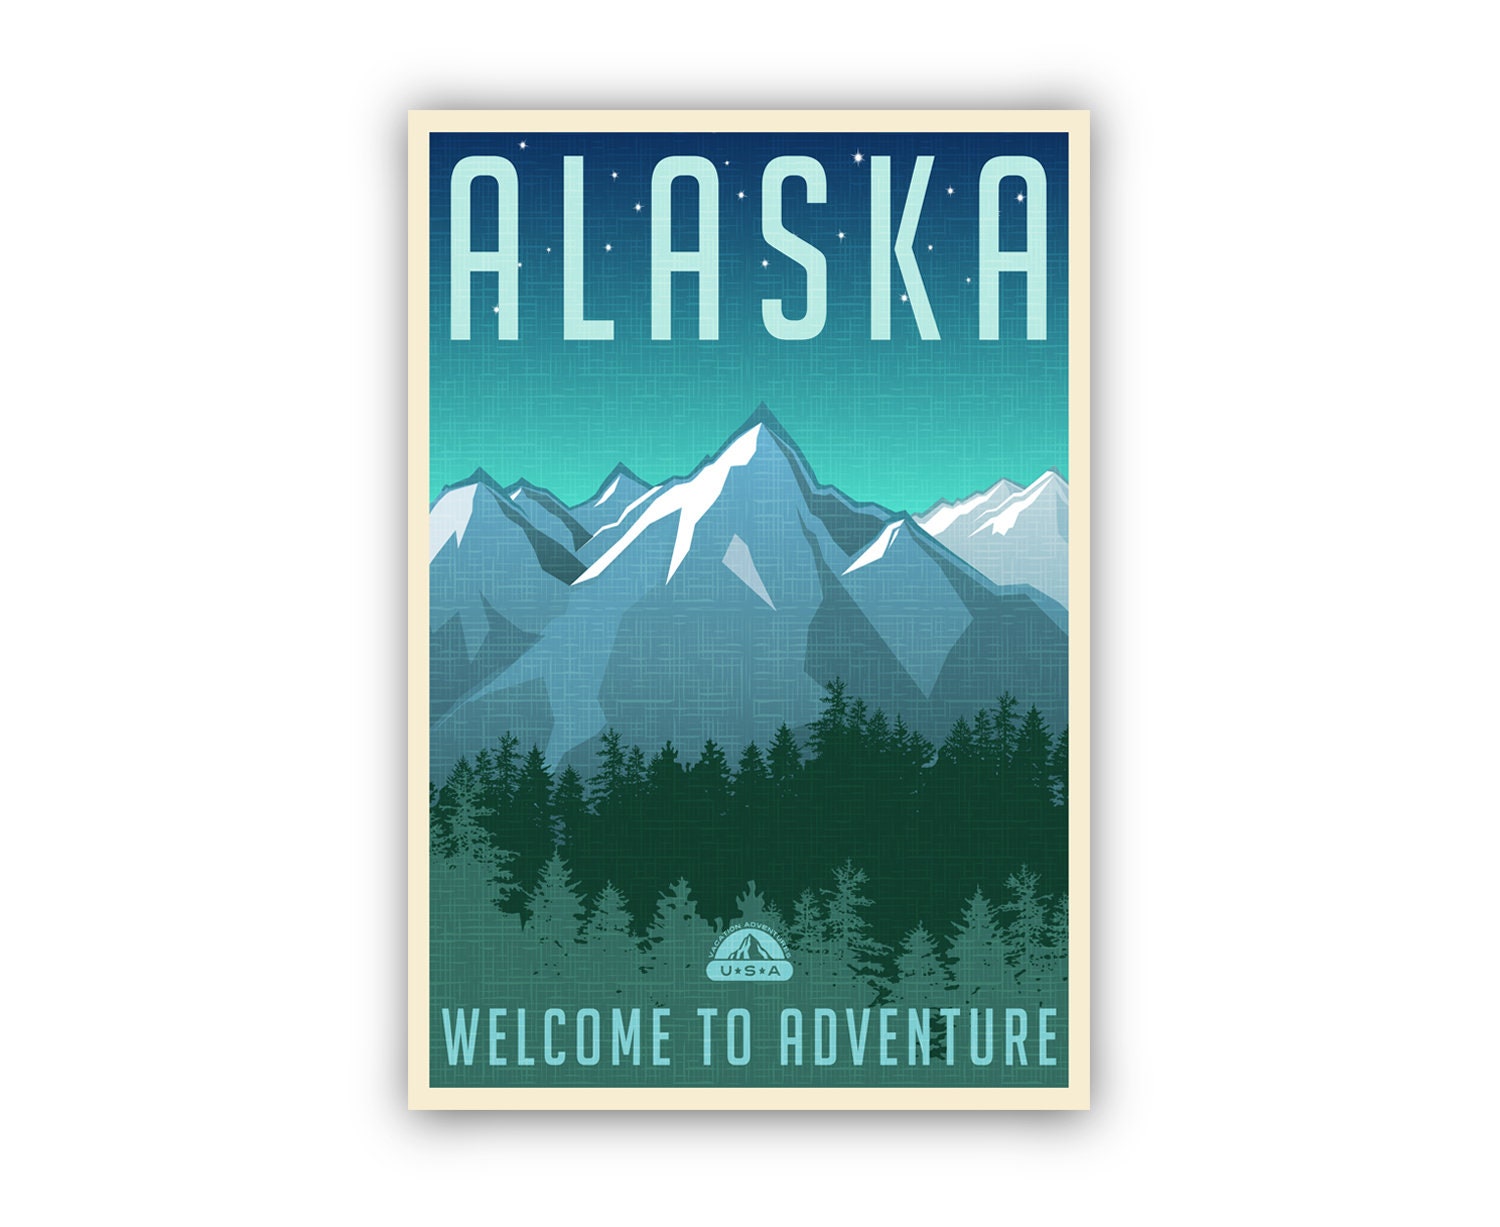 Retro Style Travel Poster, Alaska Vintage Rustic Poster Print, Home Wall Art, Office Wall Decor, Posters, Alaska, State Map Poster Print